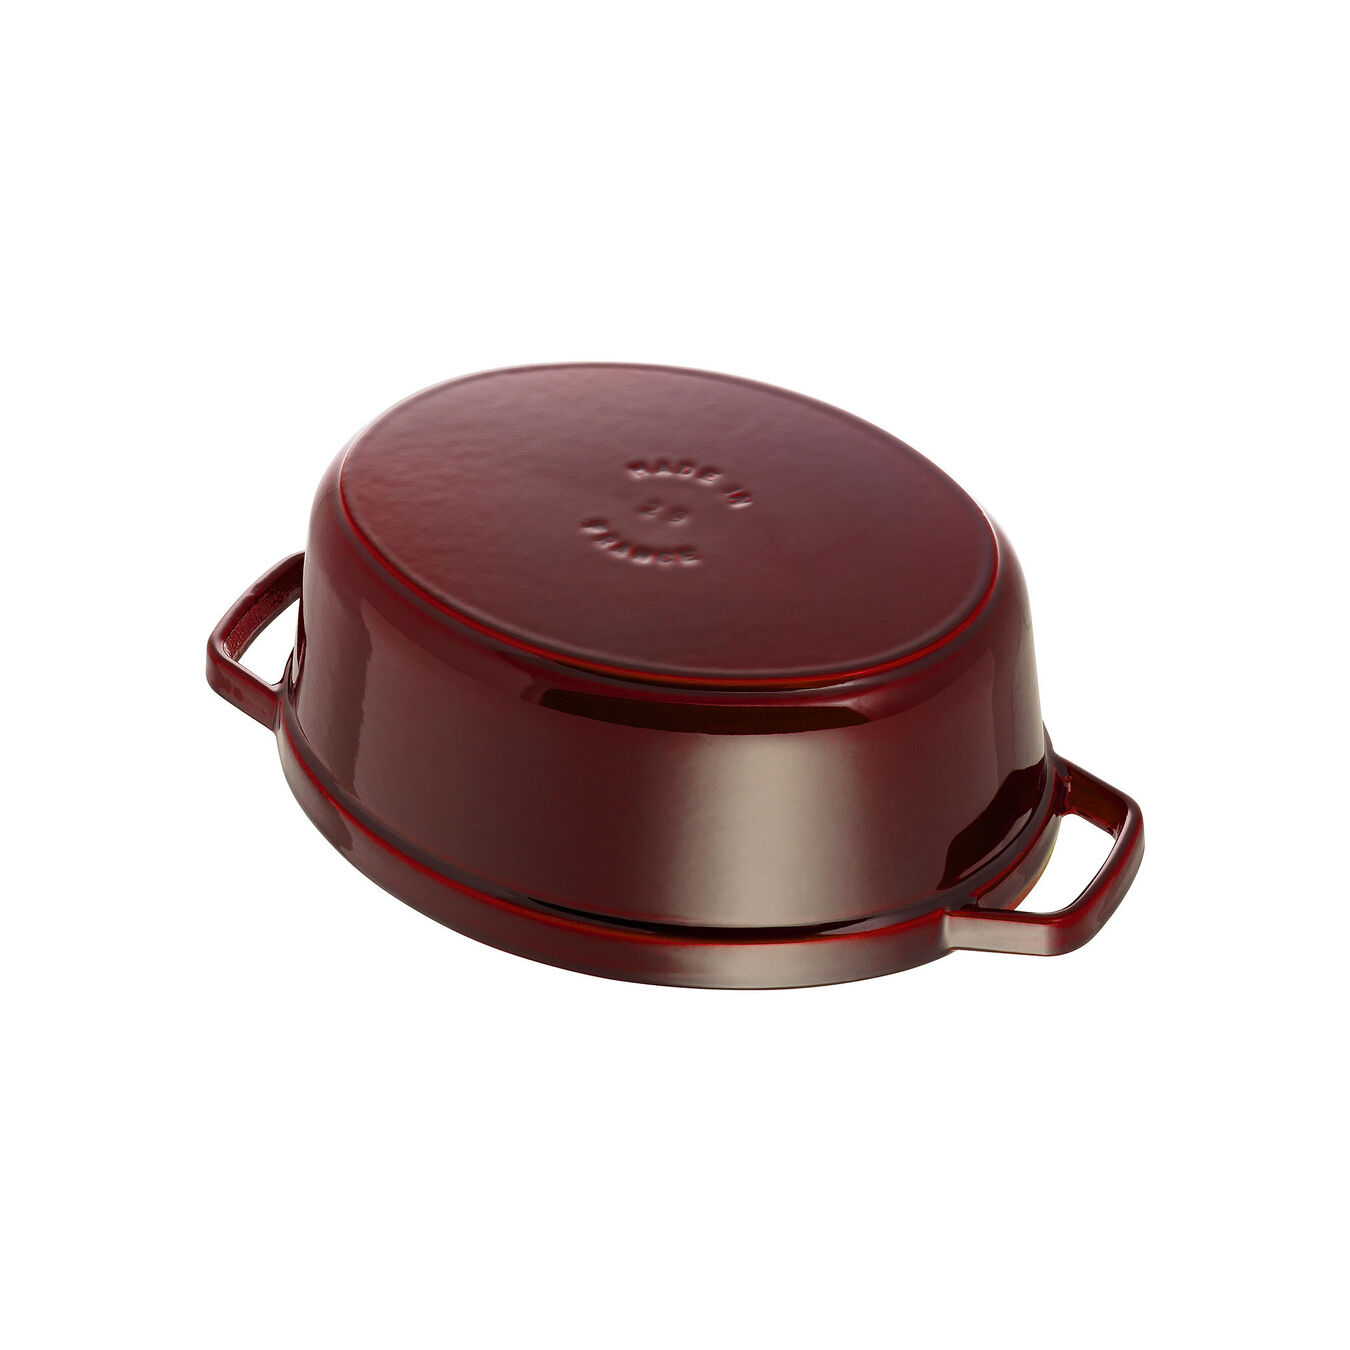 Cocotte 33 cm, oval, Grenadine-Rot, Gusseisen,,large 5